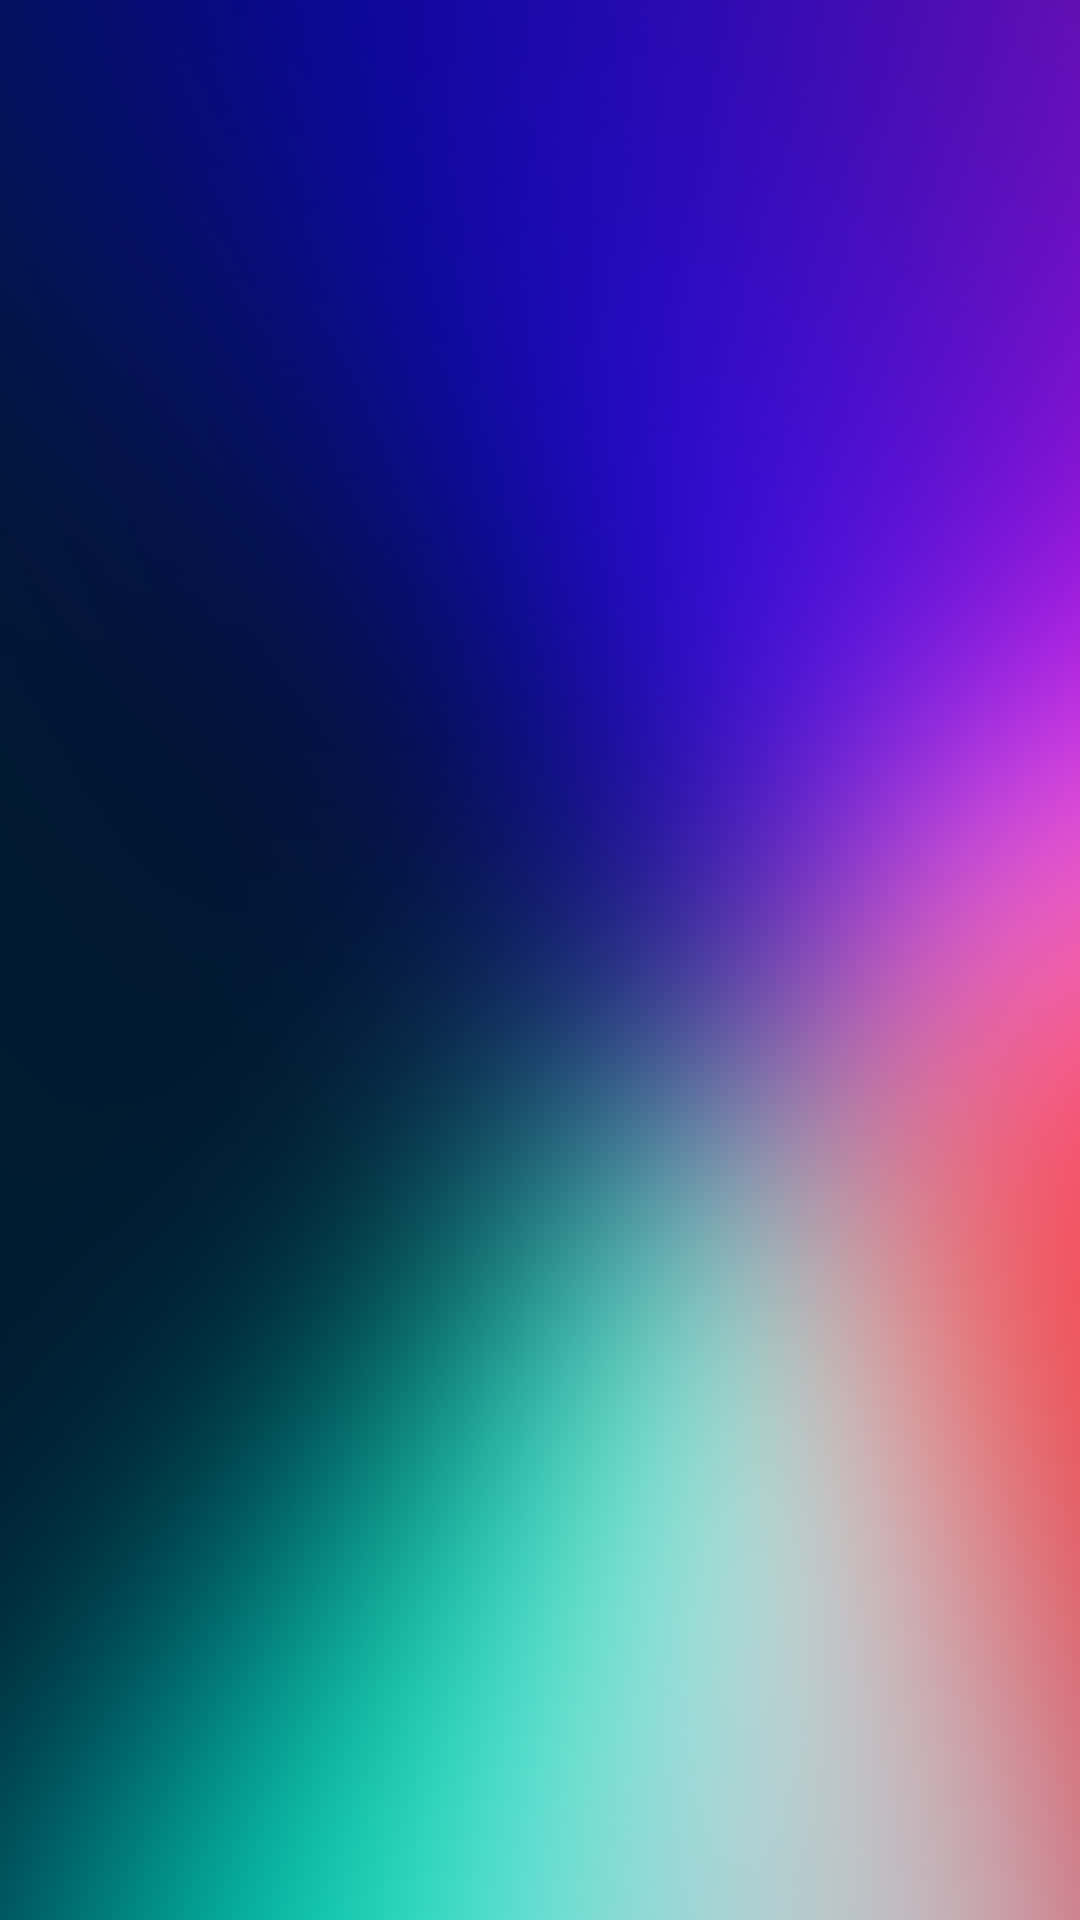 Download A Blurred Background With A Blue, Red, And Blue Color ...